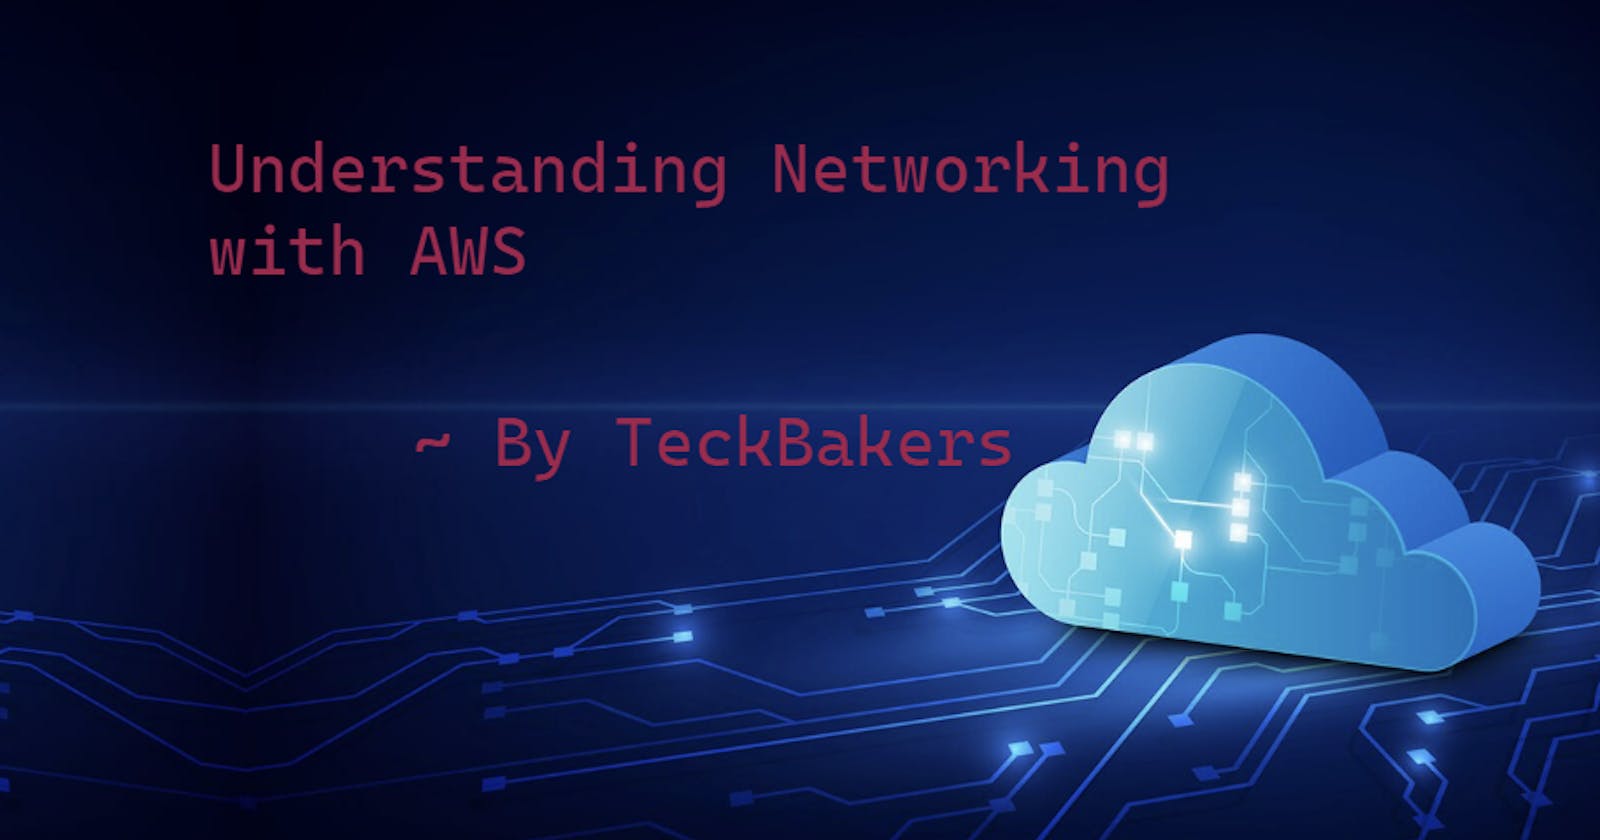 Understanding networking with AWS